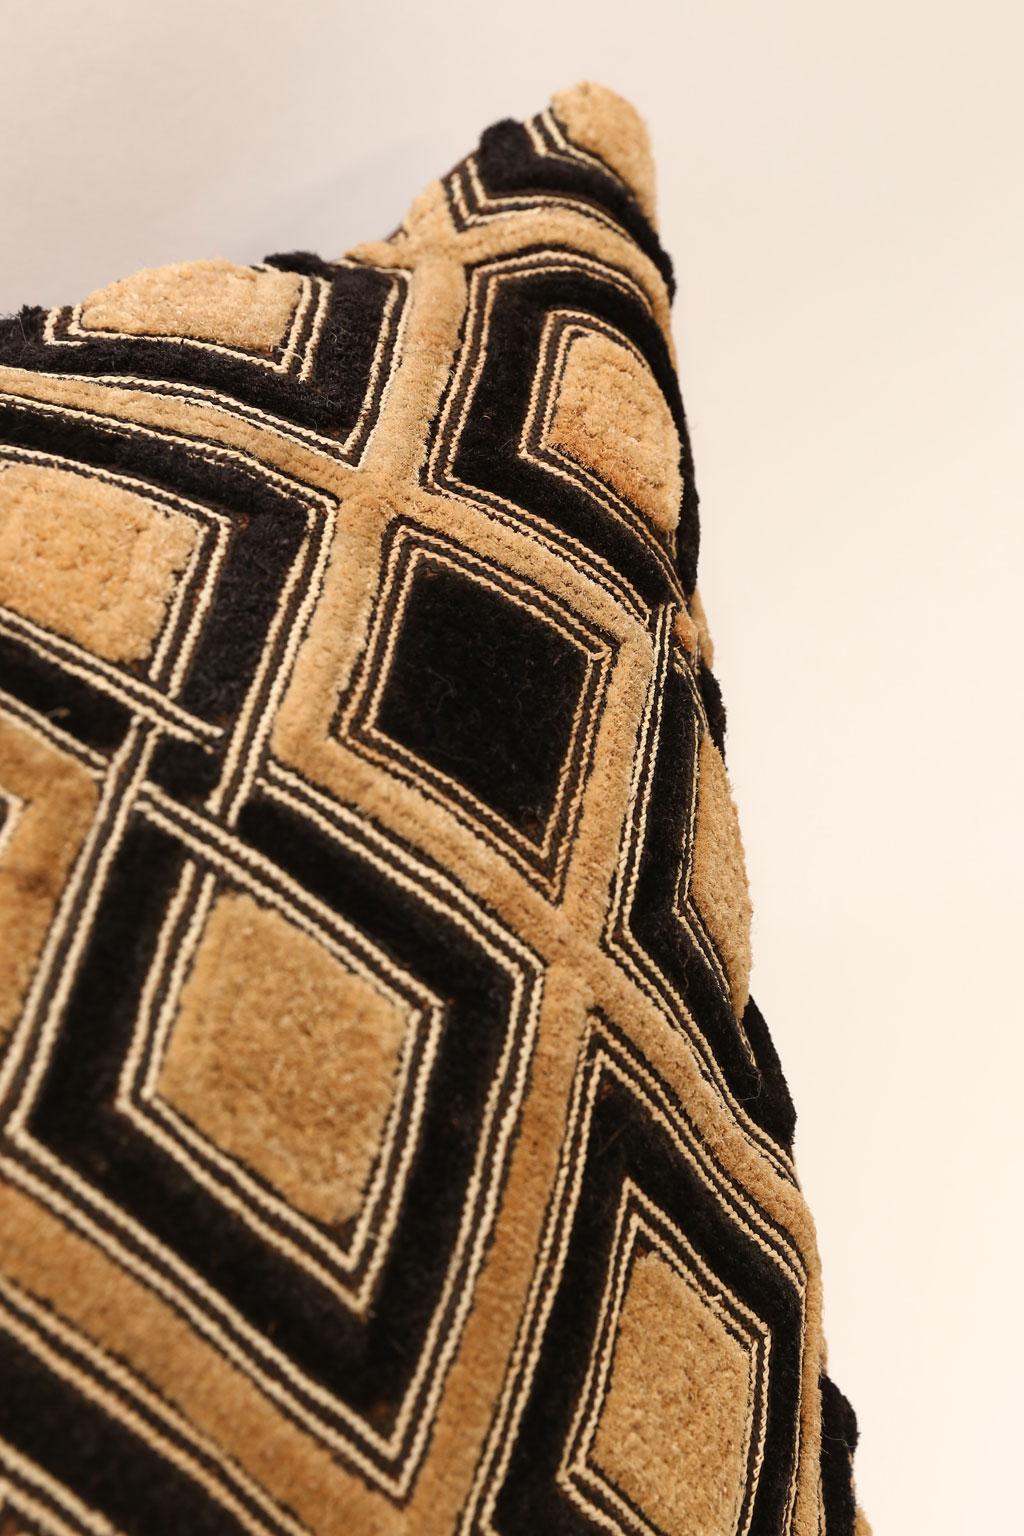 Large Kuba cloth cushion: Face is made from vintage Kuba cloth (raphia palm with cut pile to resemble velvet). Backed by hand-dyed vintage hemp. Includes zip fastener and feather insert. Compliments a second Kuba cloth cushion in our inventory (item